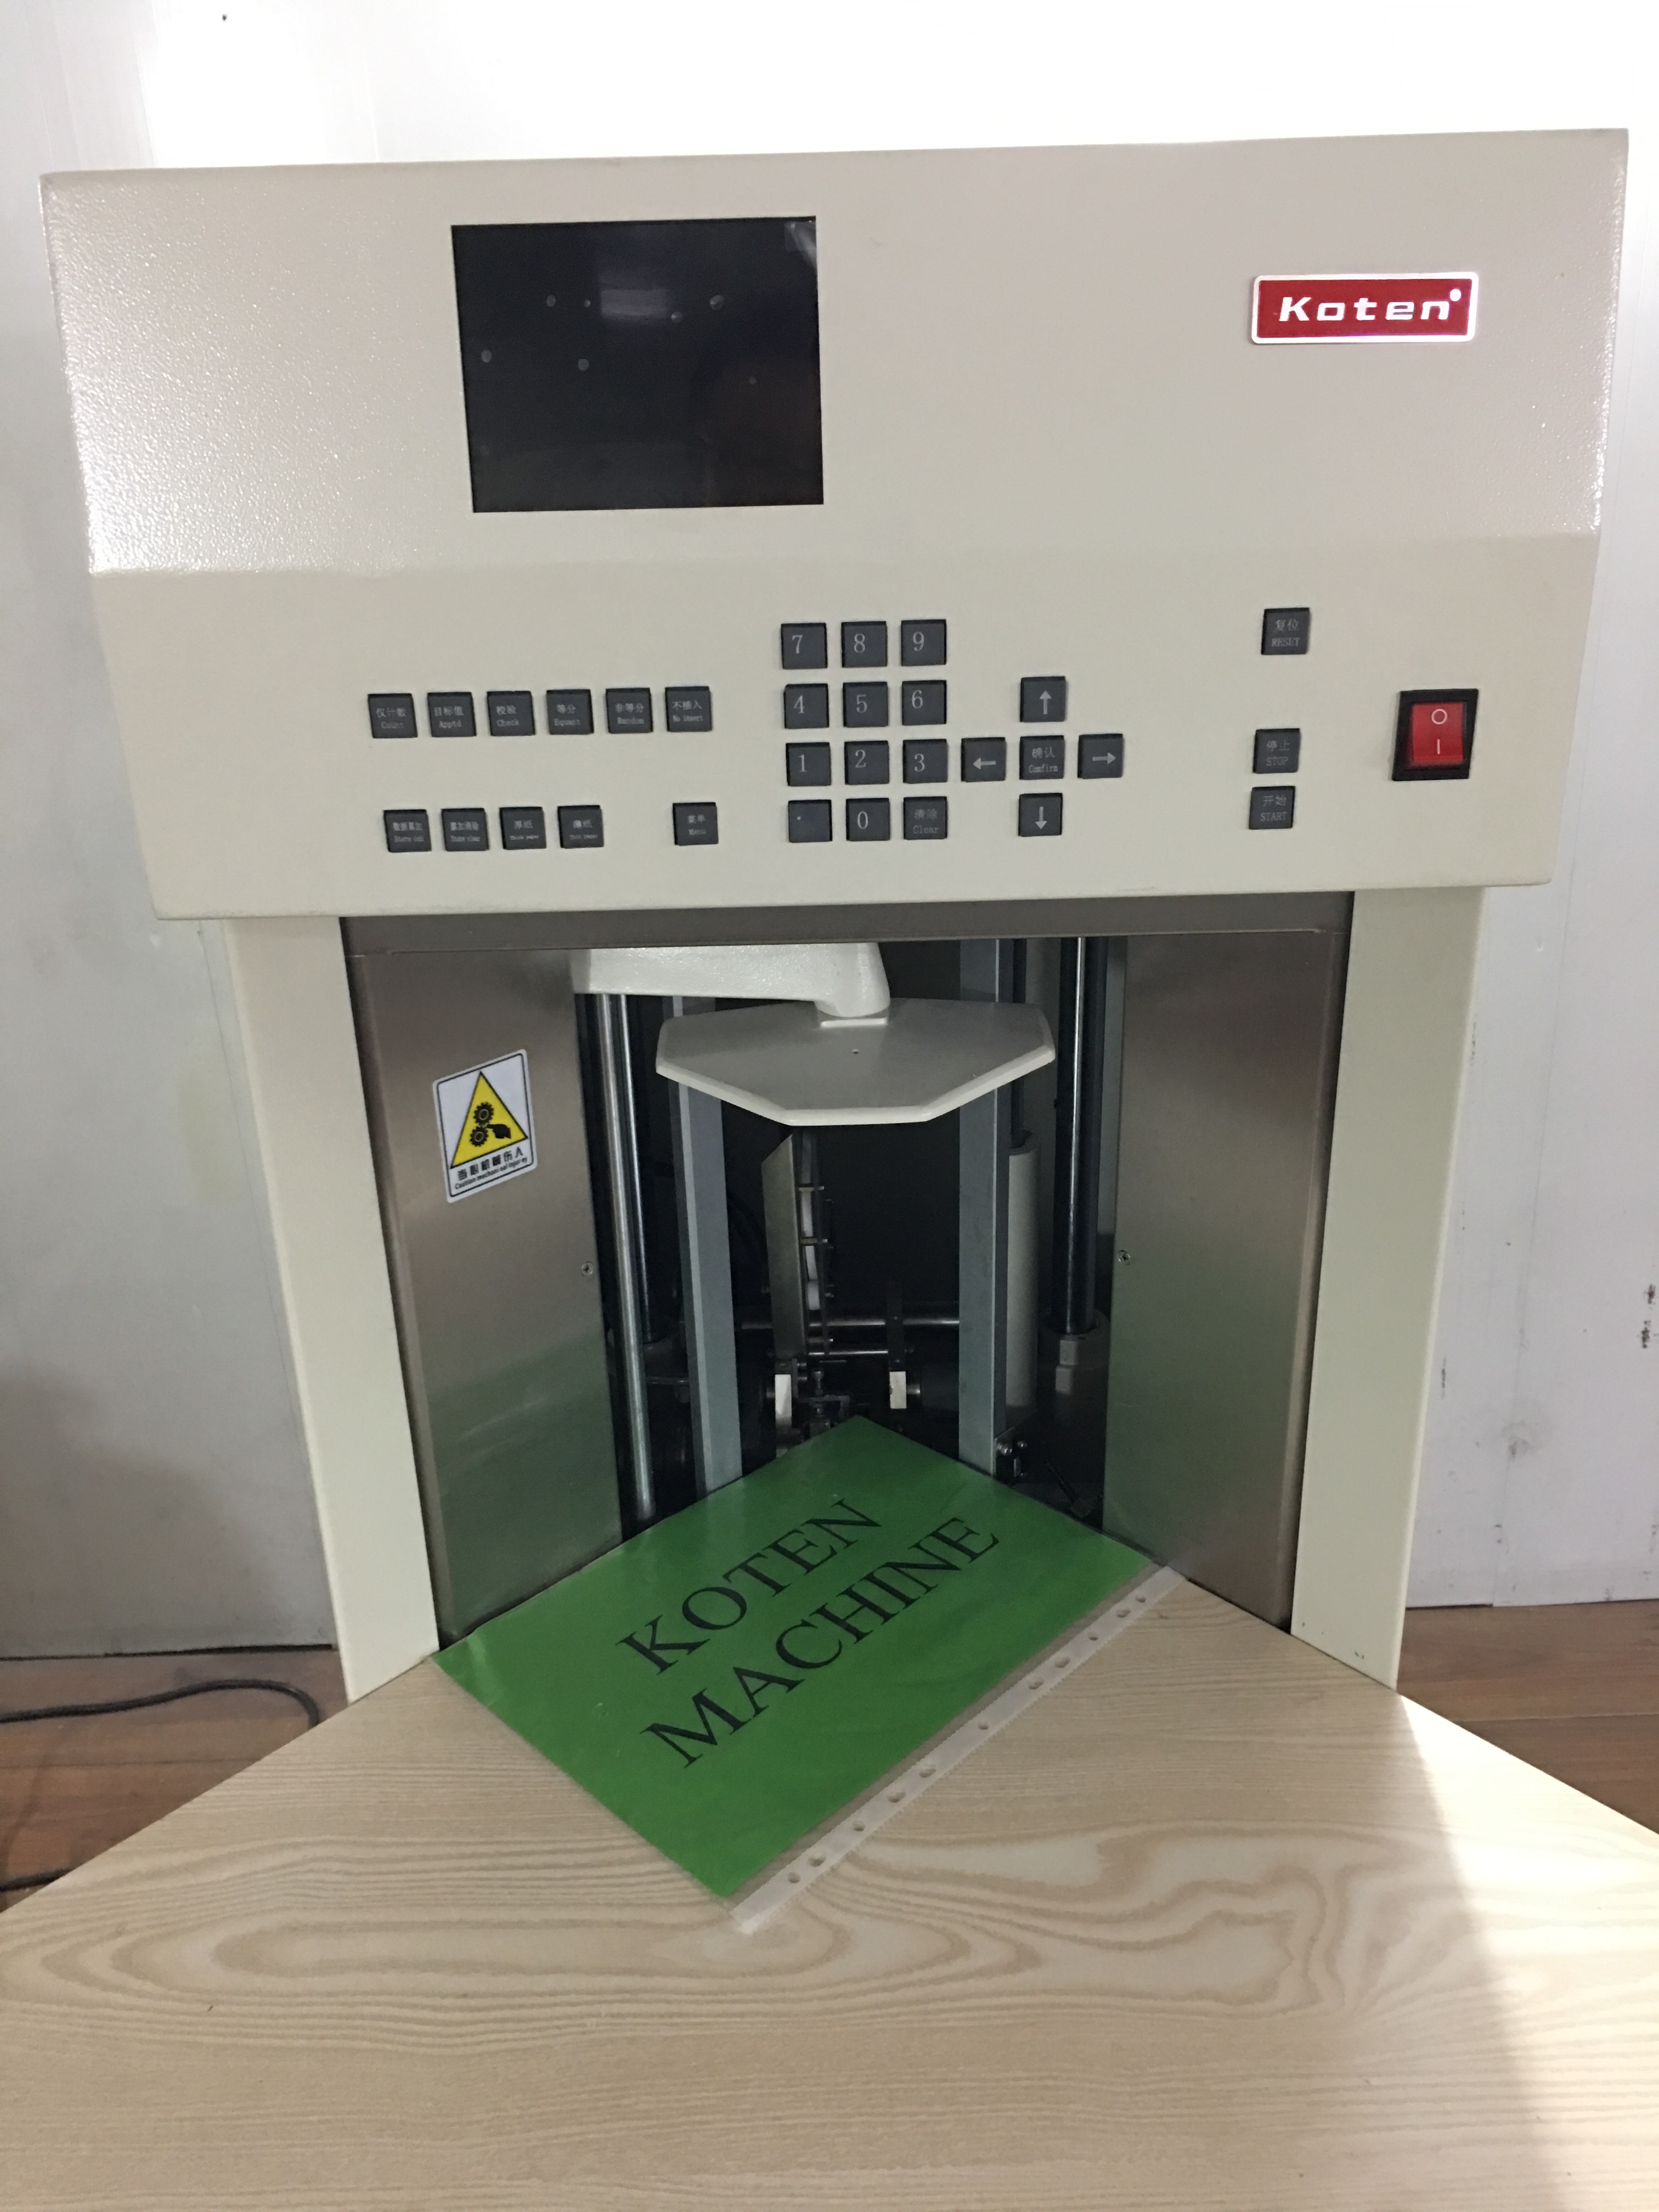 Paper Sheet Counting Machine